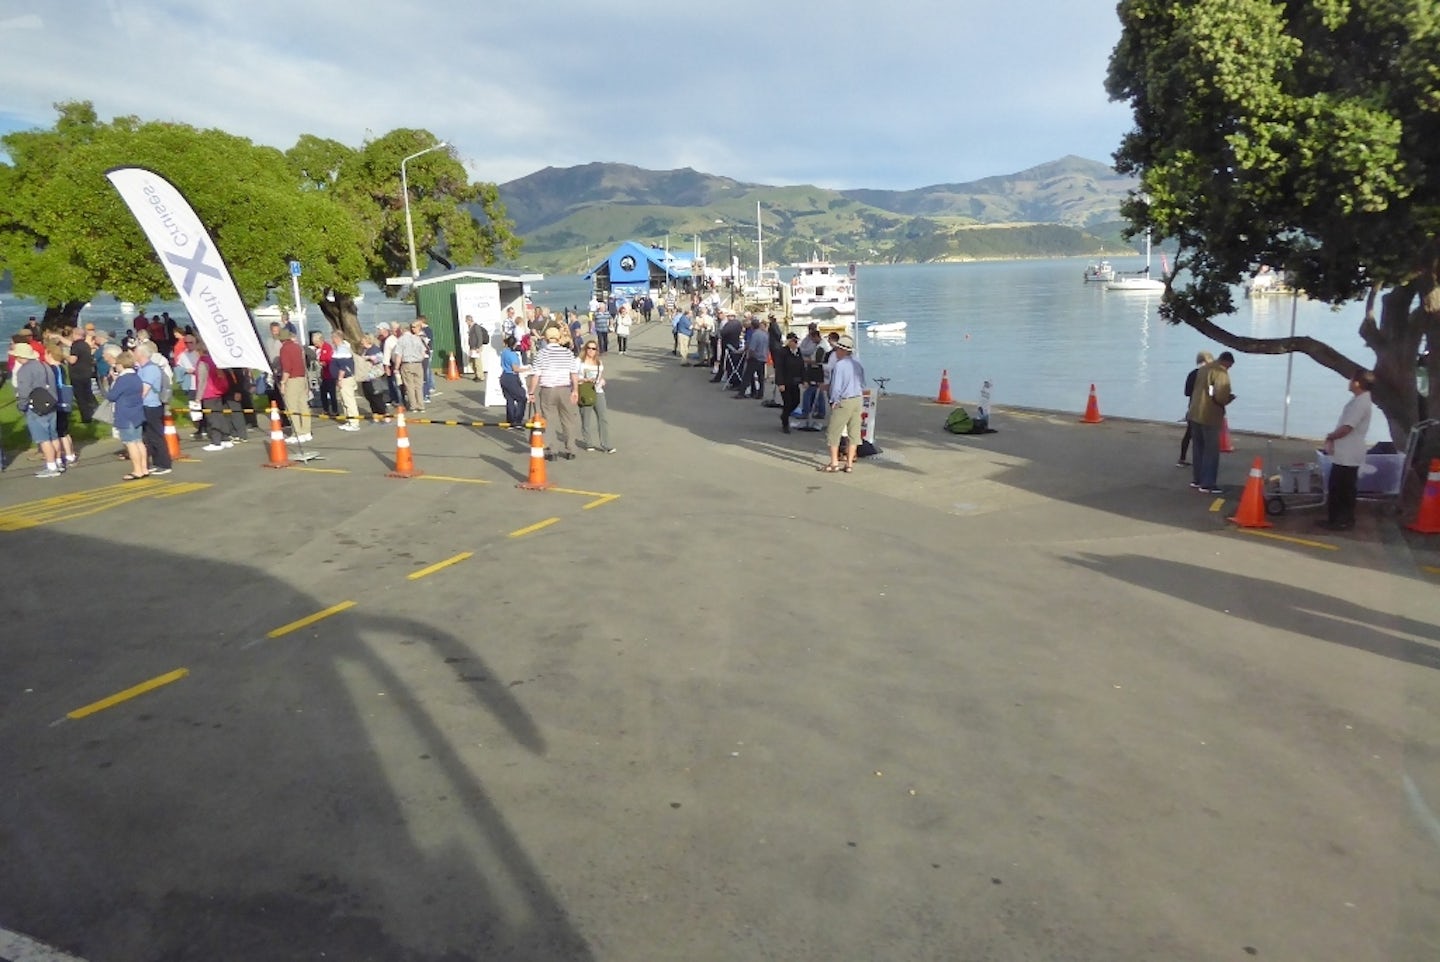 Akaroa jetty with queue waiting to board tender boat